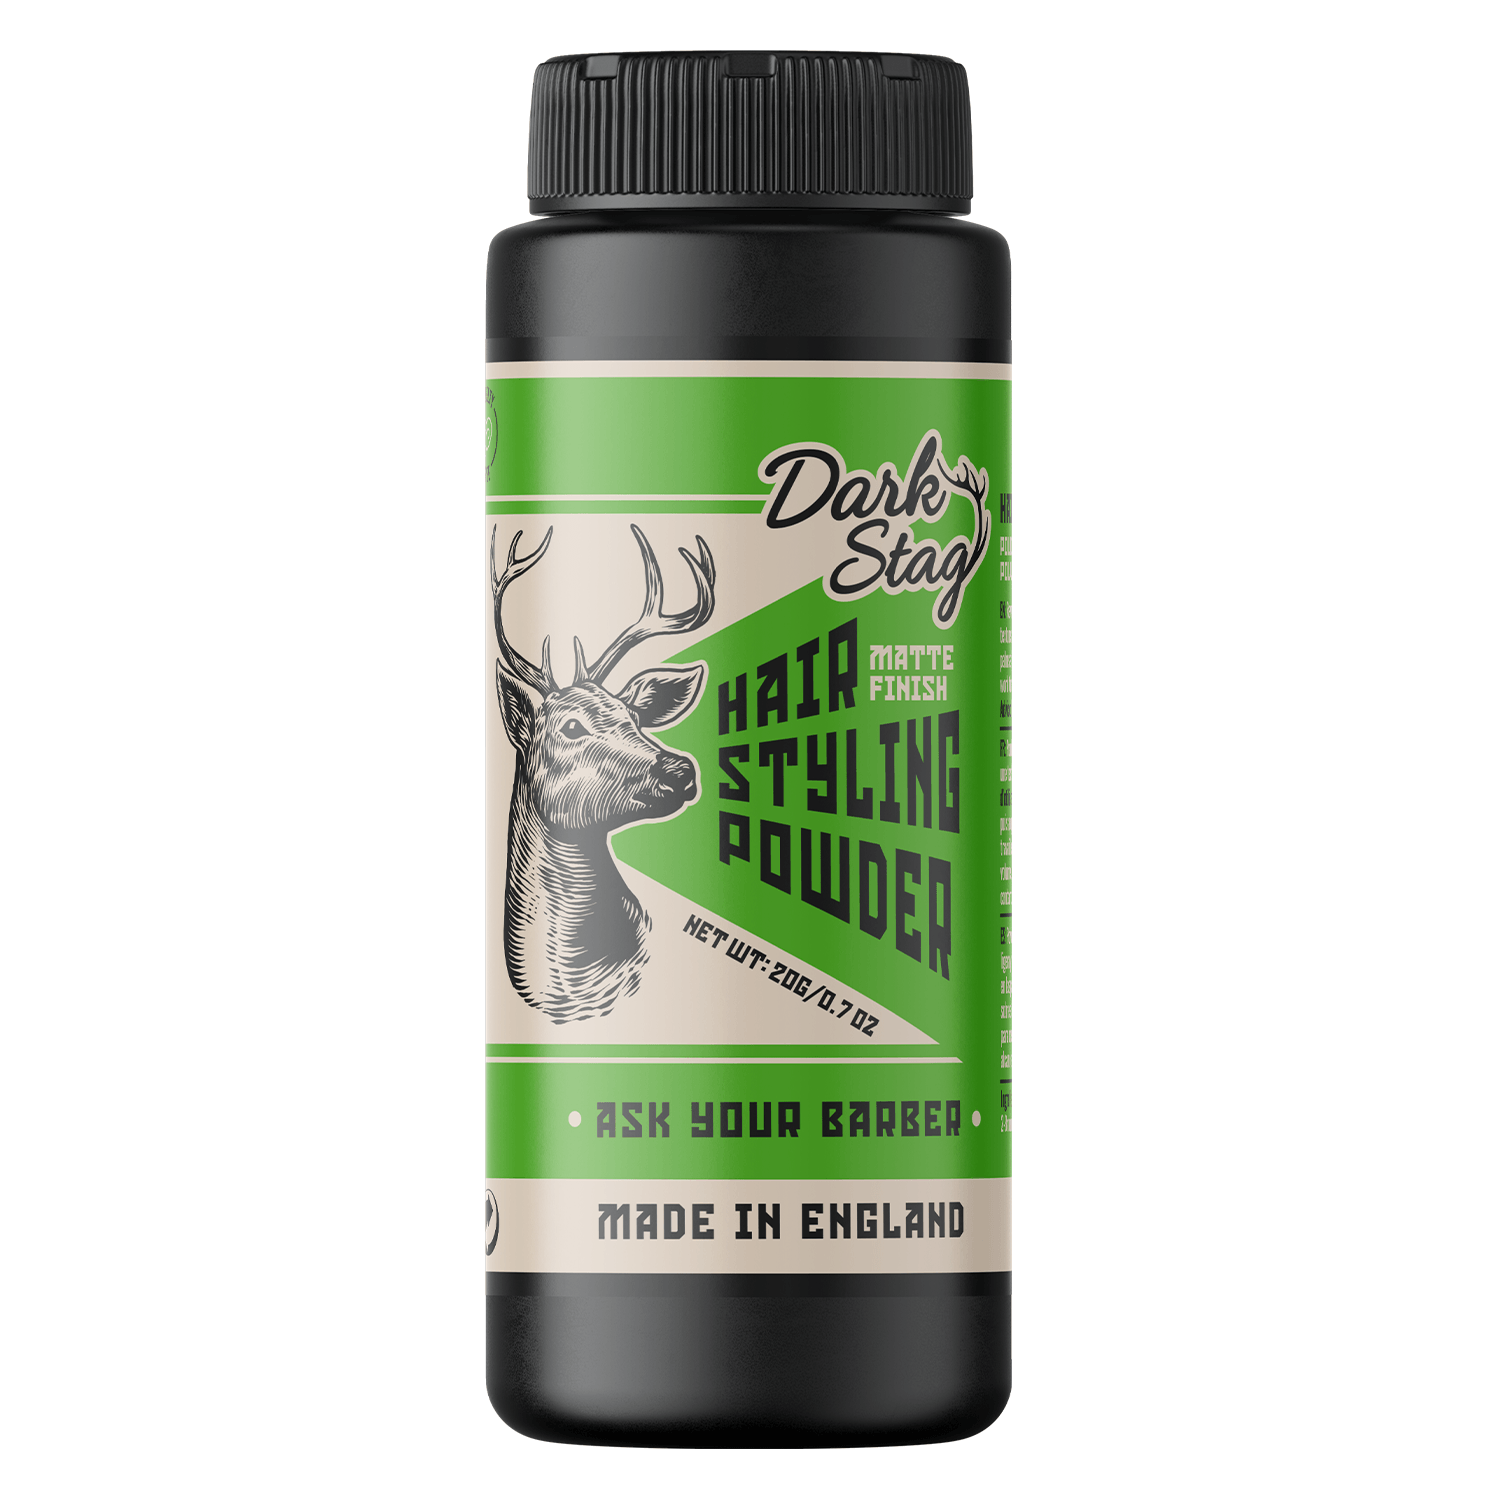 Product image from Dark Stag - Styling Powder